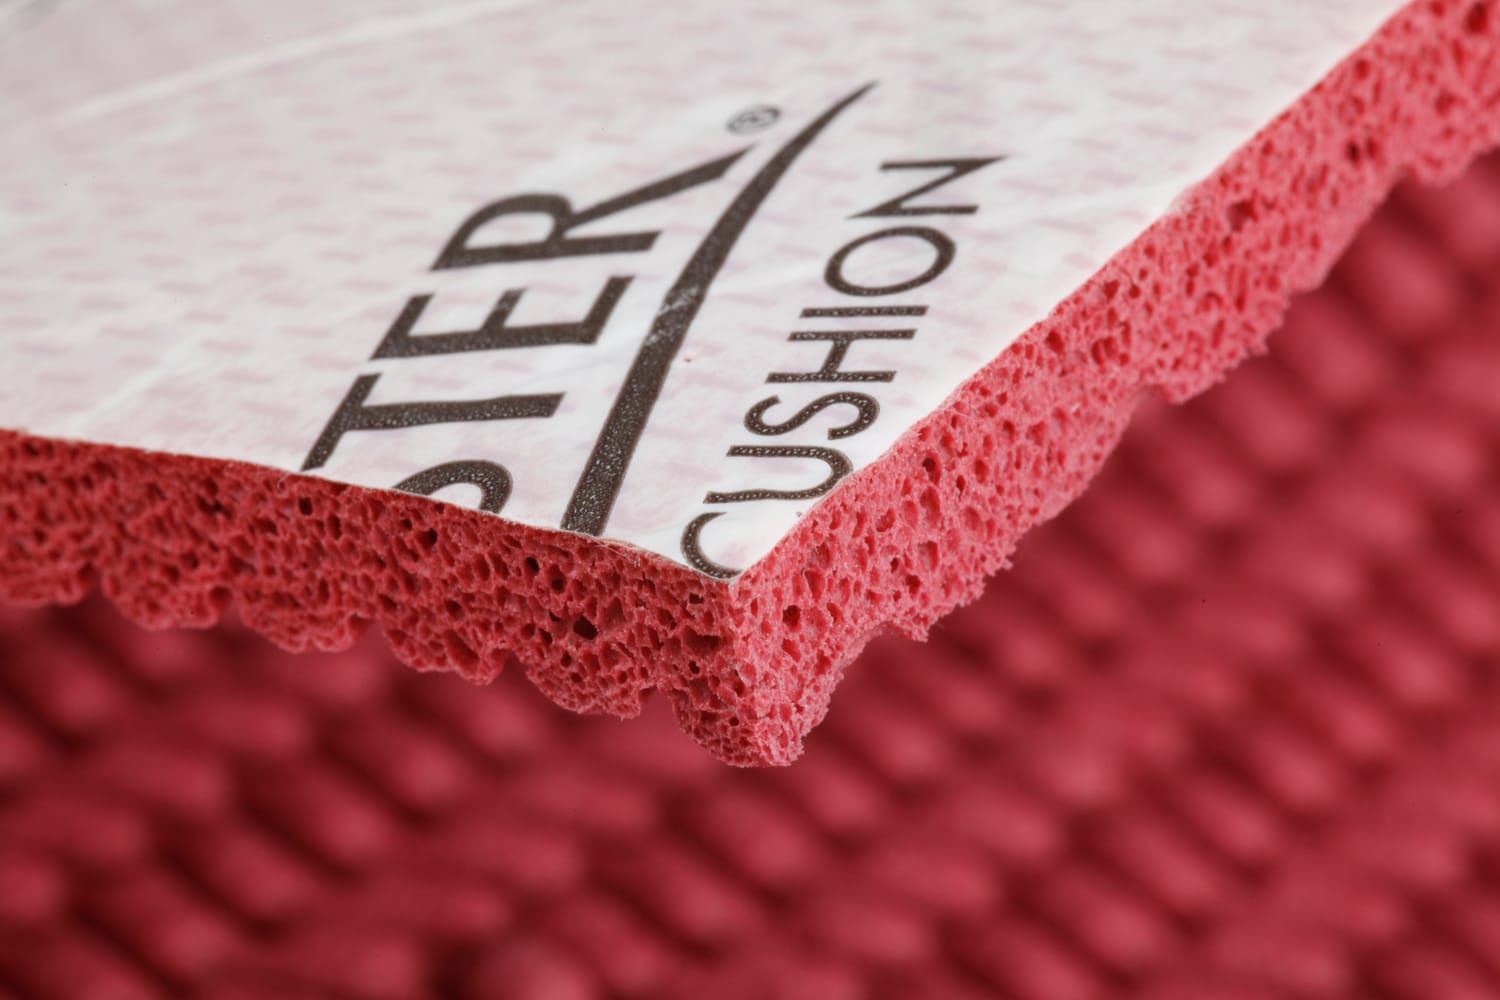 Wholesale foam padding under carpet For All Your Customers' Flooring Needs  